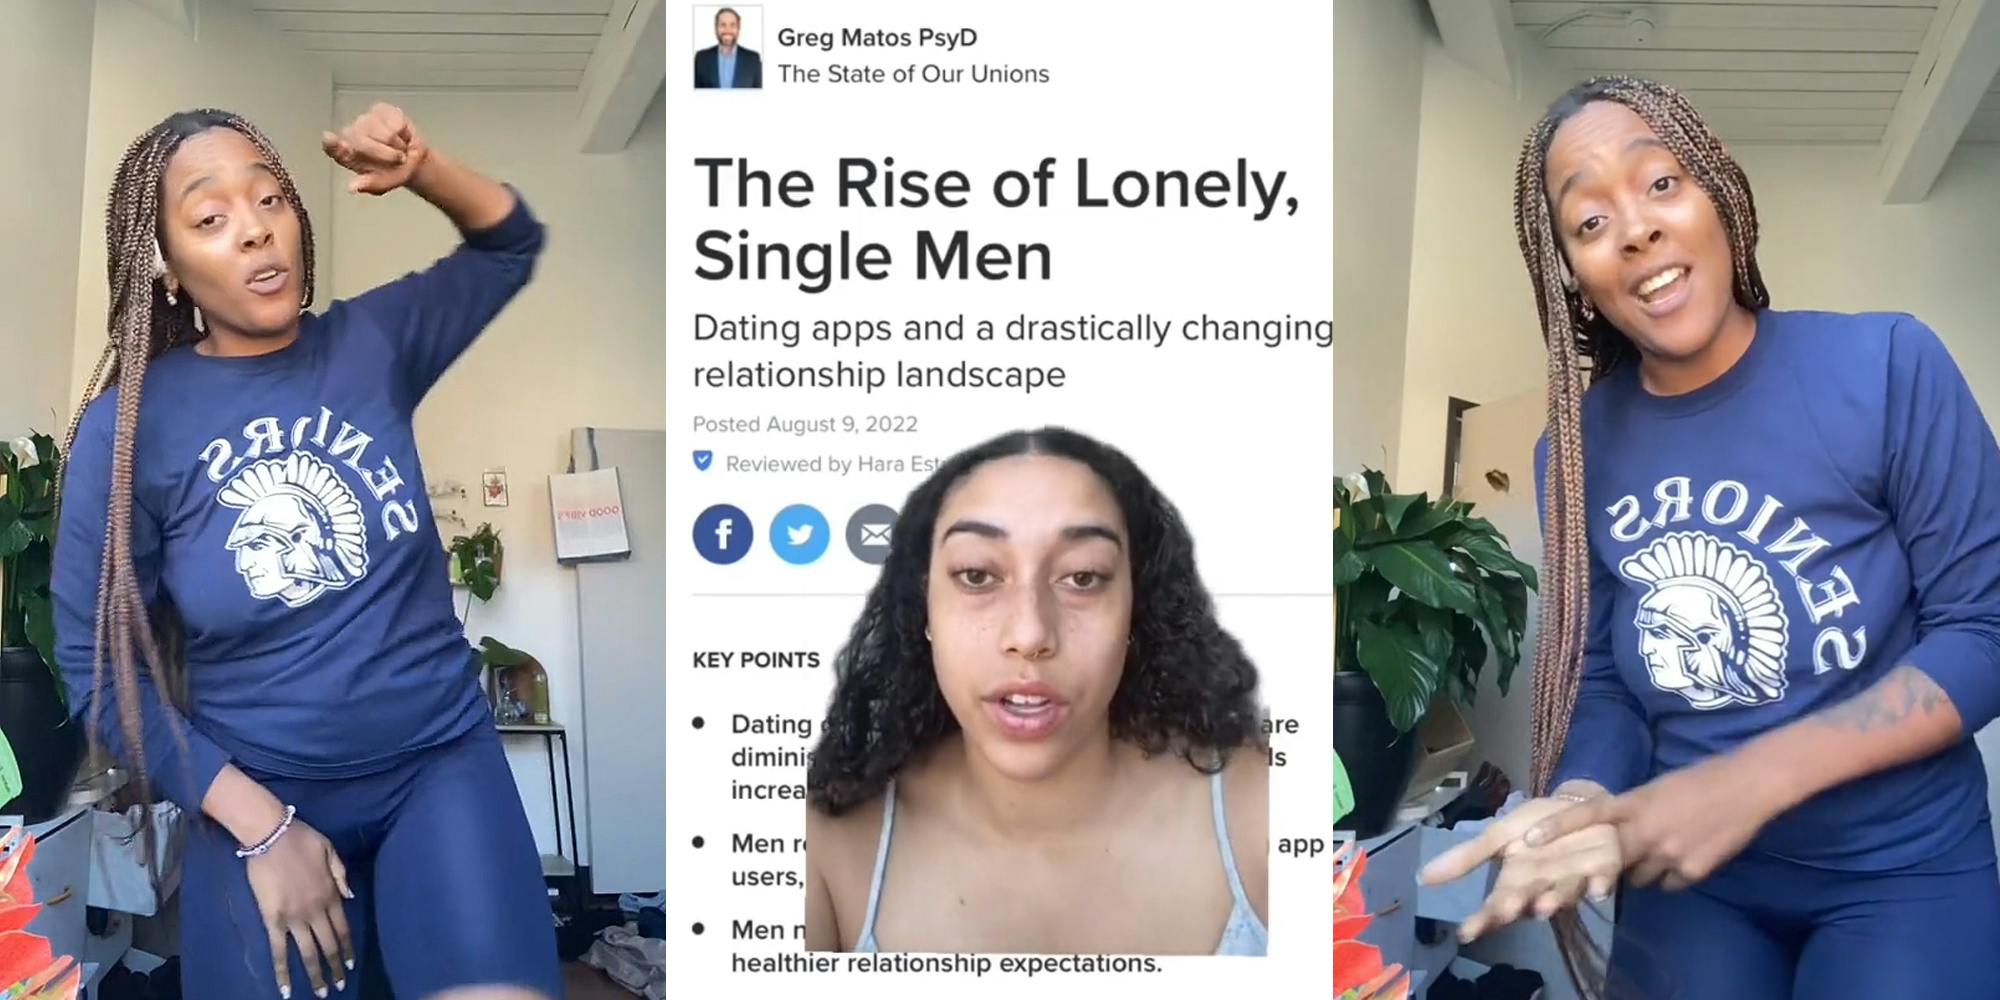 woman speaking hand up (l) woman greenscreen TikTok over article "The Rise of Lonley, Single Men" caption "Dating apps and a drastically changing relationship landscape" (c) woman speaking hand pointing on other hand (r)